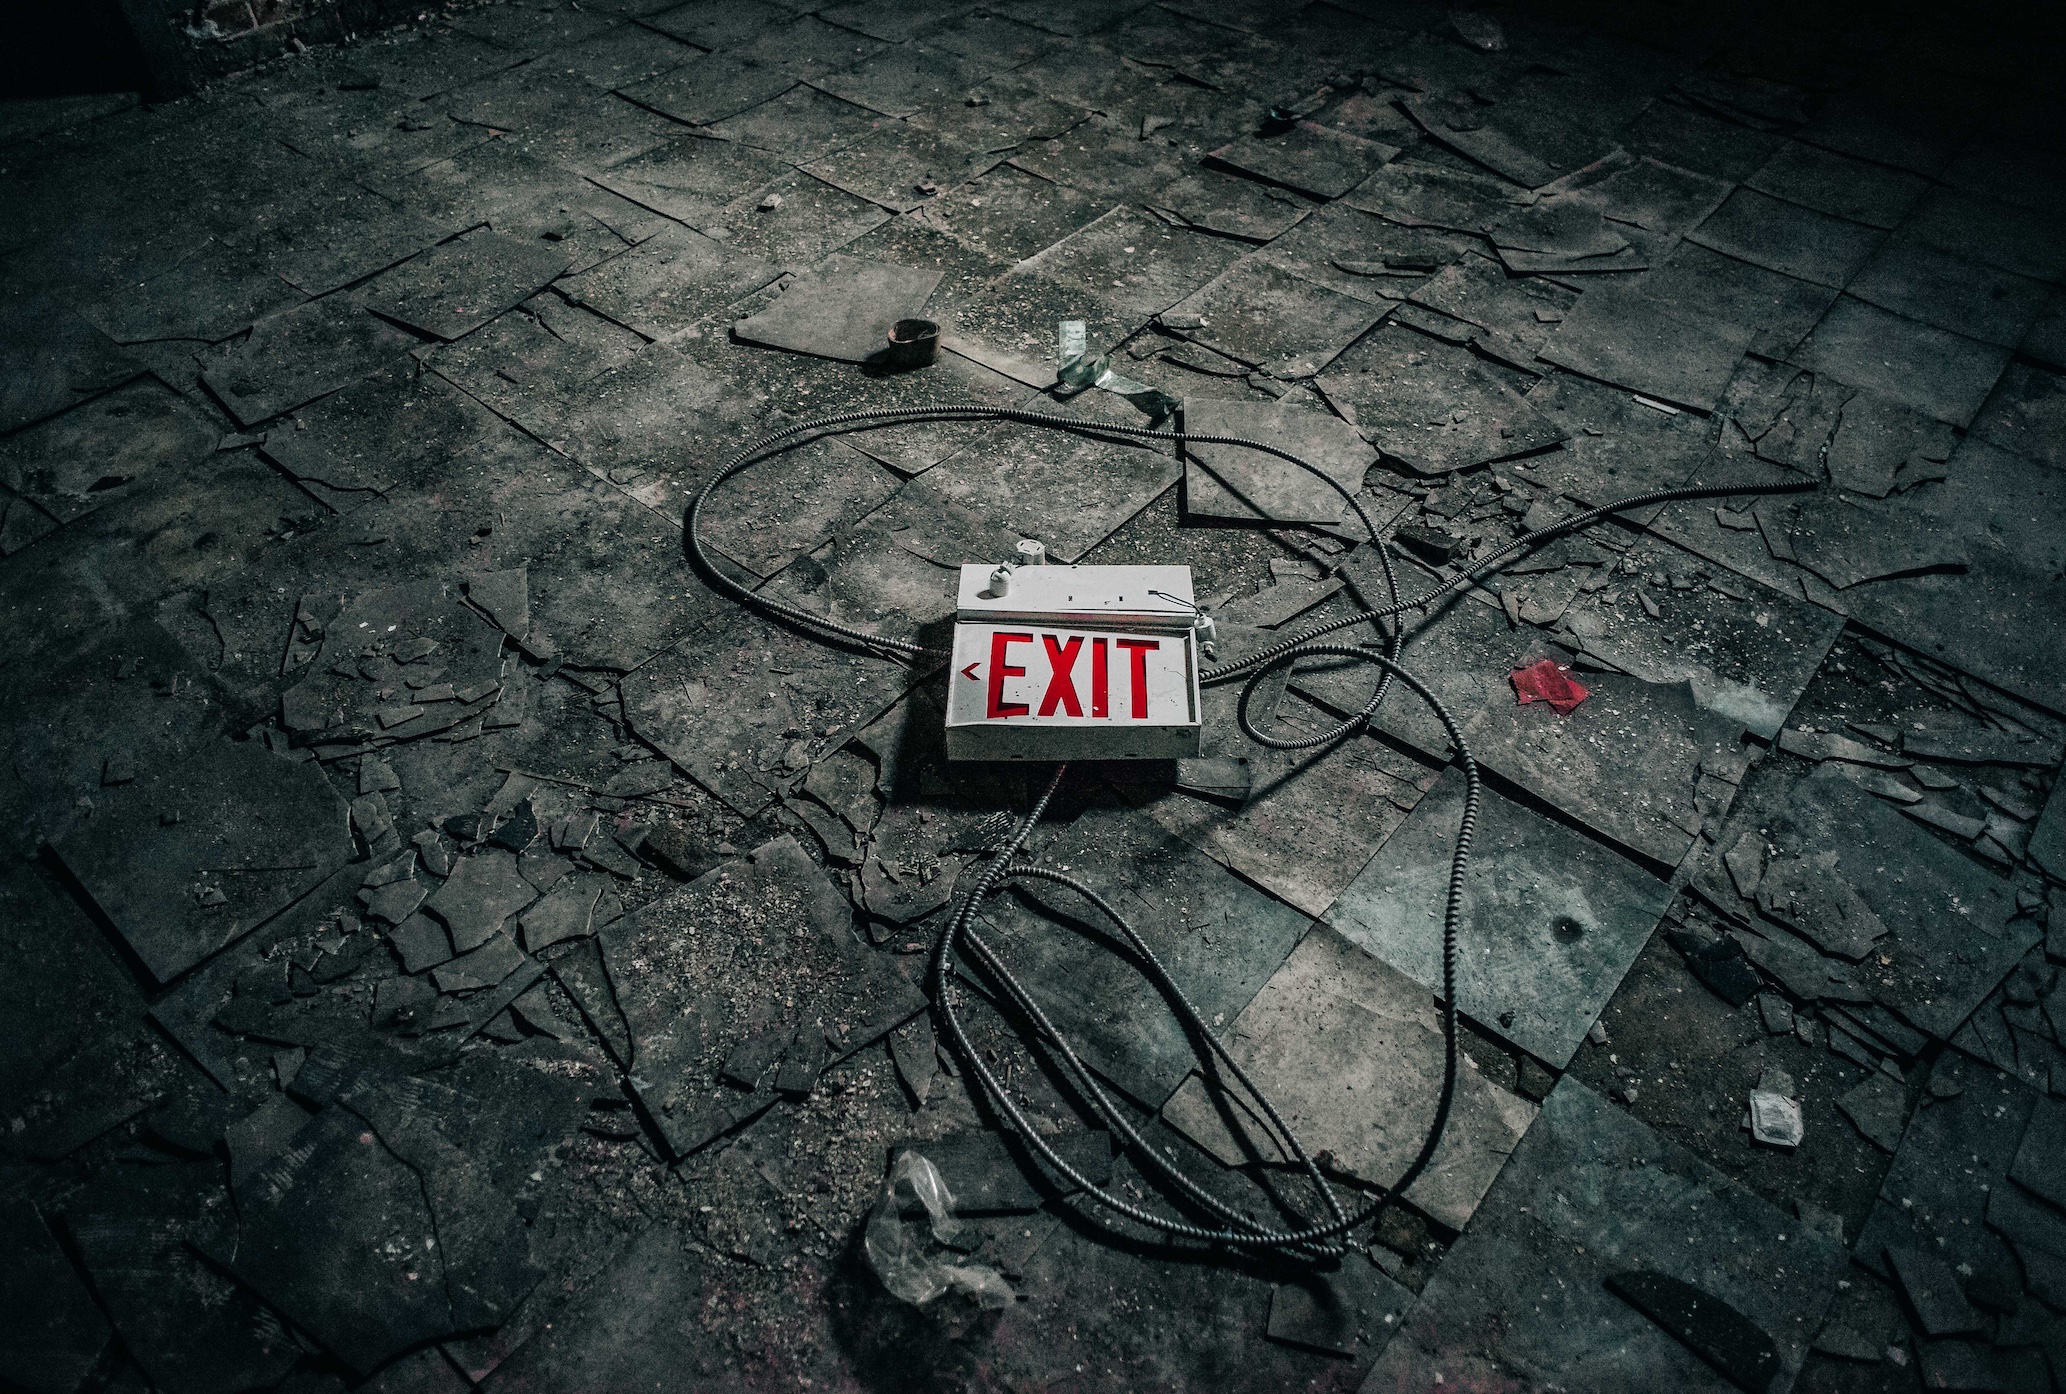 Damaged exit sign laying on floor in abandoned room; image by Kev Soto, via Unsplash.com.